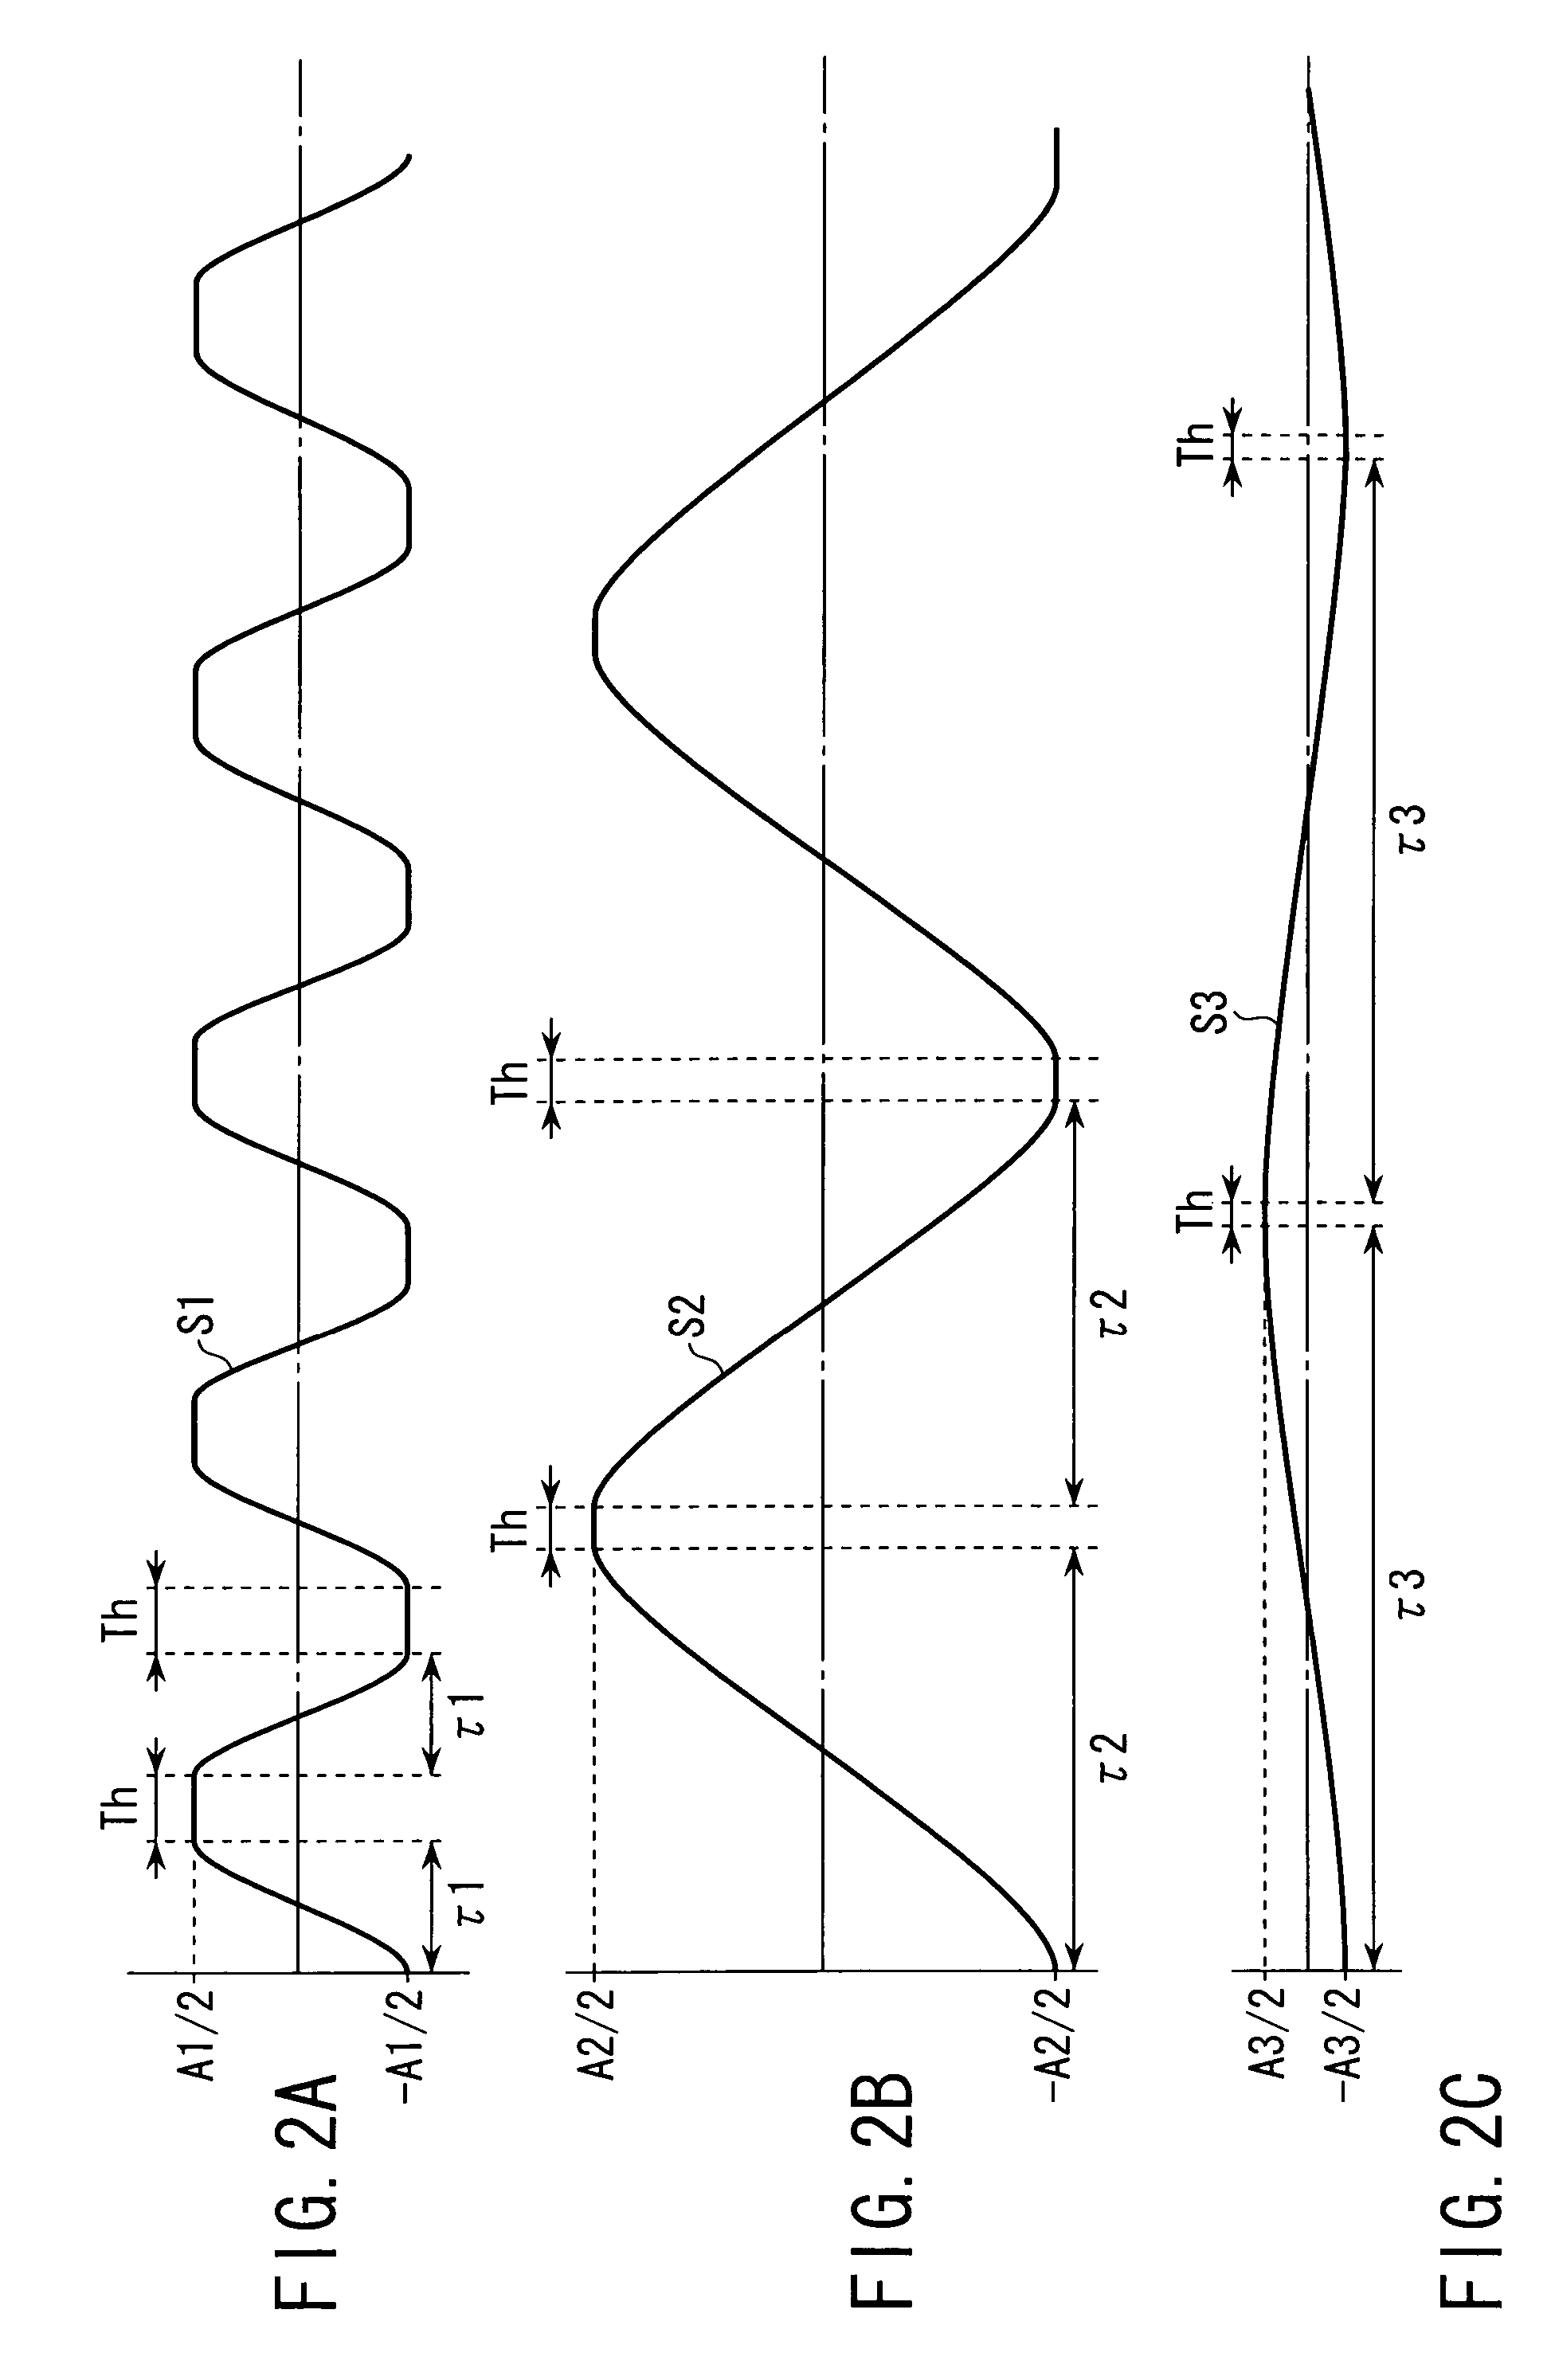 Maximum time interval error test signal generating apparatus not affected by low-pass measuring filter